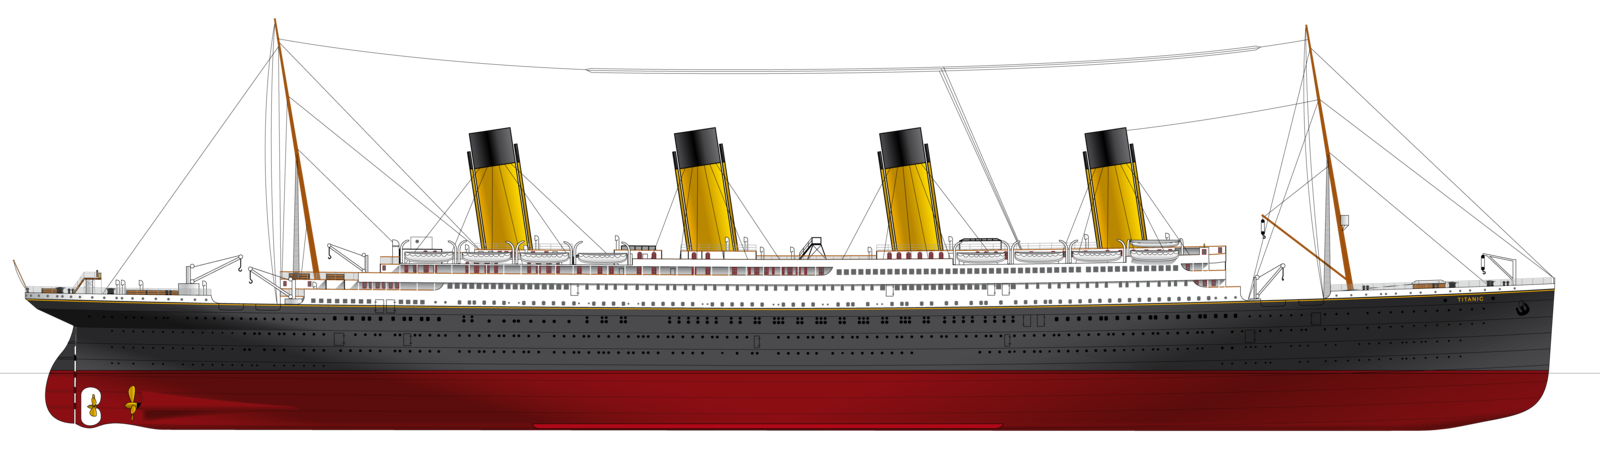 Titanic Png Images Free Download